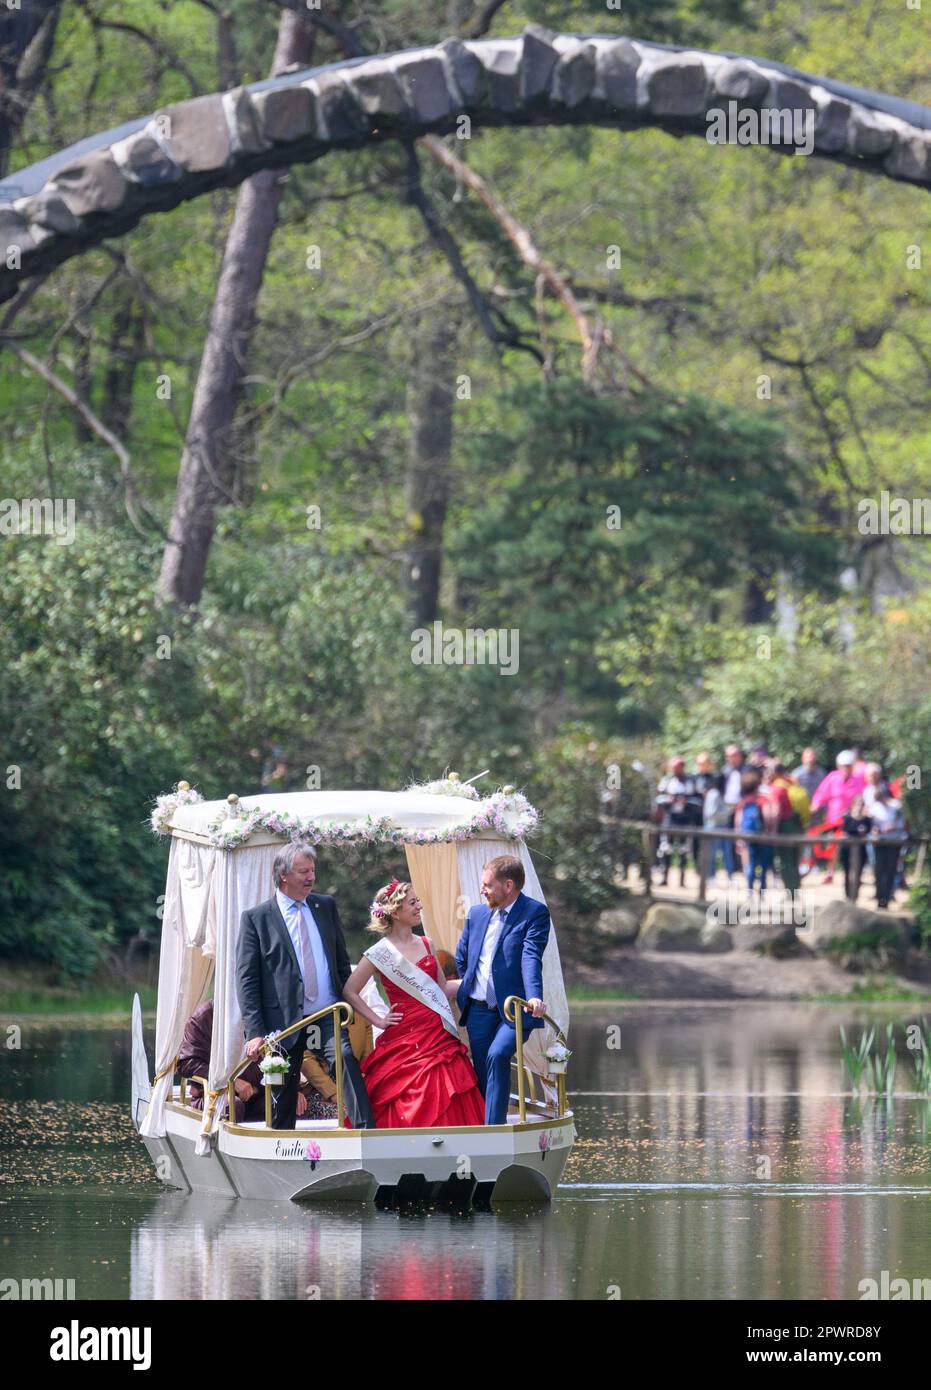 Gablenz, Germany. 01st May, 2023. Michael Kretschmer (CDU, r.), Prime Minister of Saxony, the Kromlau Blossom King Stefanie Engler (M) and Dietmar Noack (l.) Mayor of Gablenz drive the newly christened wedding barge 'Emilie' under the Rakotz Bridge in the Rhododendron Park Kromlau. The gondola can soon be rented by wedding couples, but also by other visitors. Credit: Robert Michael/dpa/Alamy Live News Stock Photo